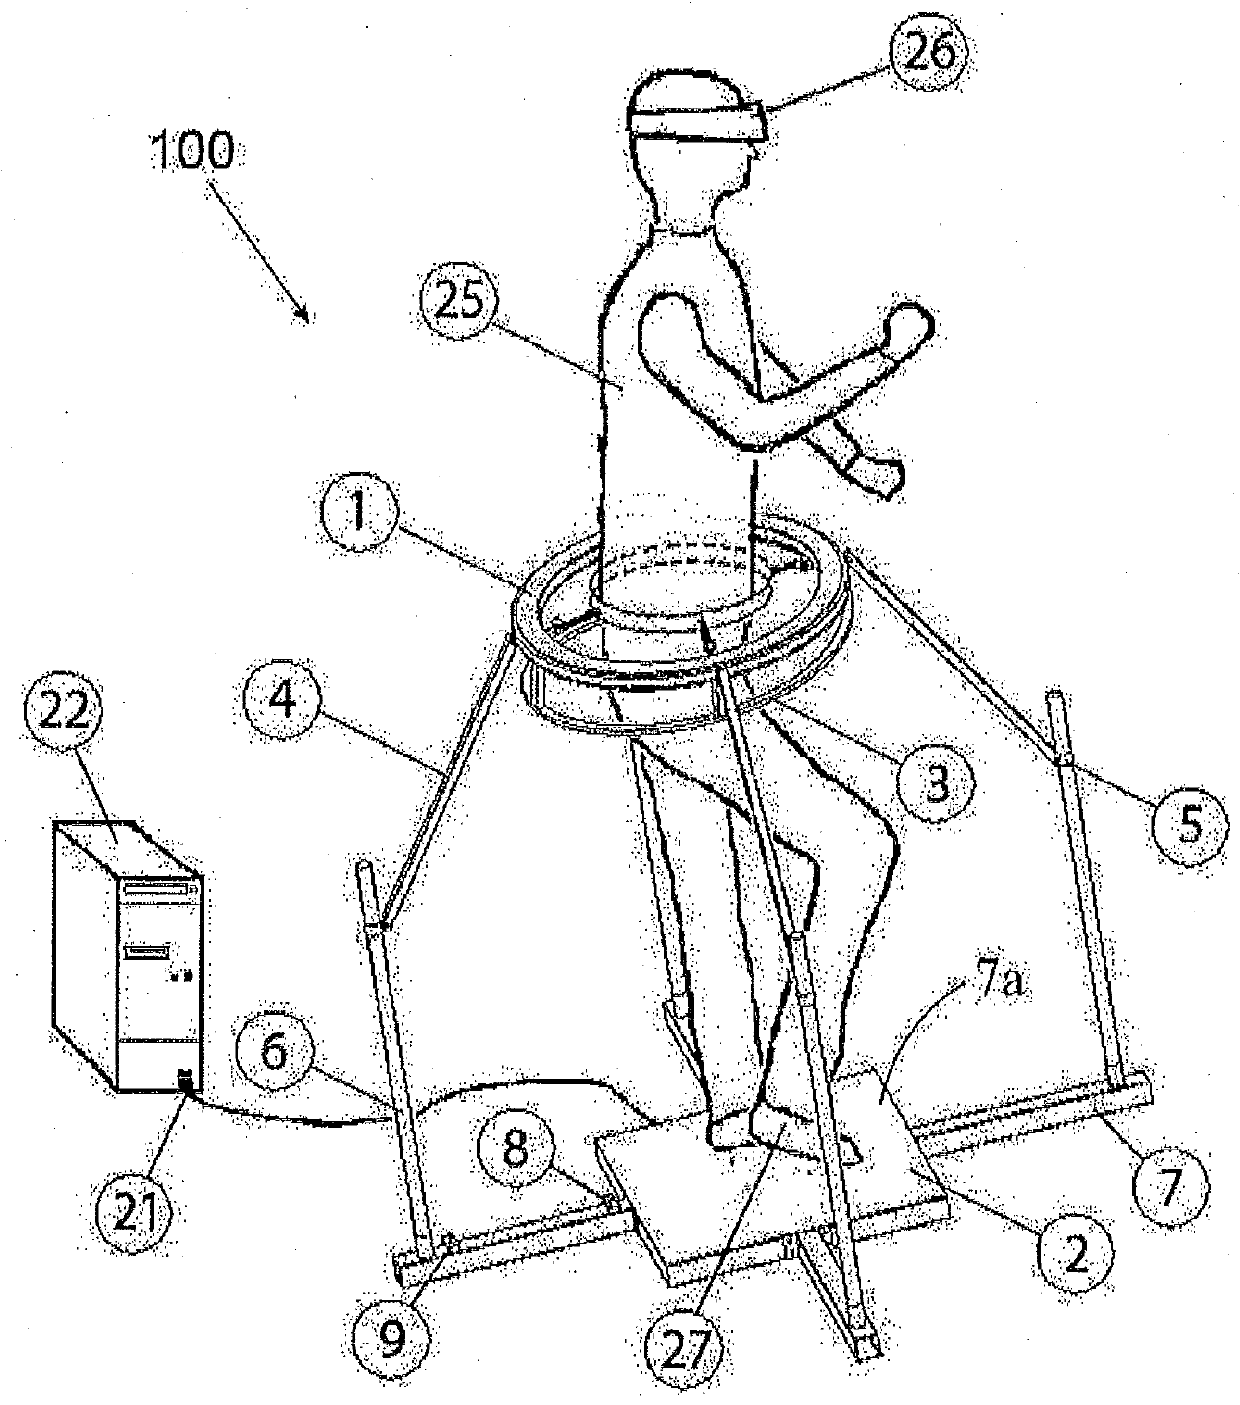 An apparatus for accommodating a person and for partially limiting the freedom of movement of the person